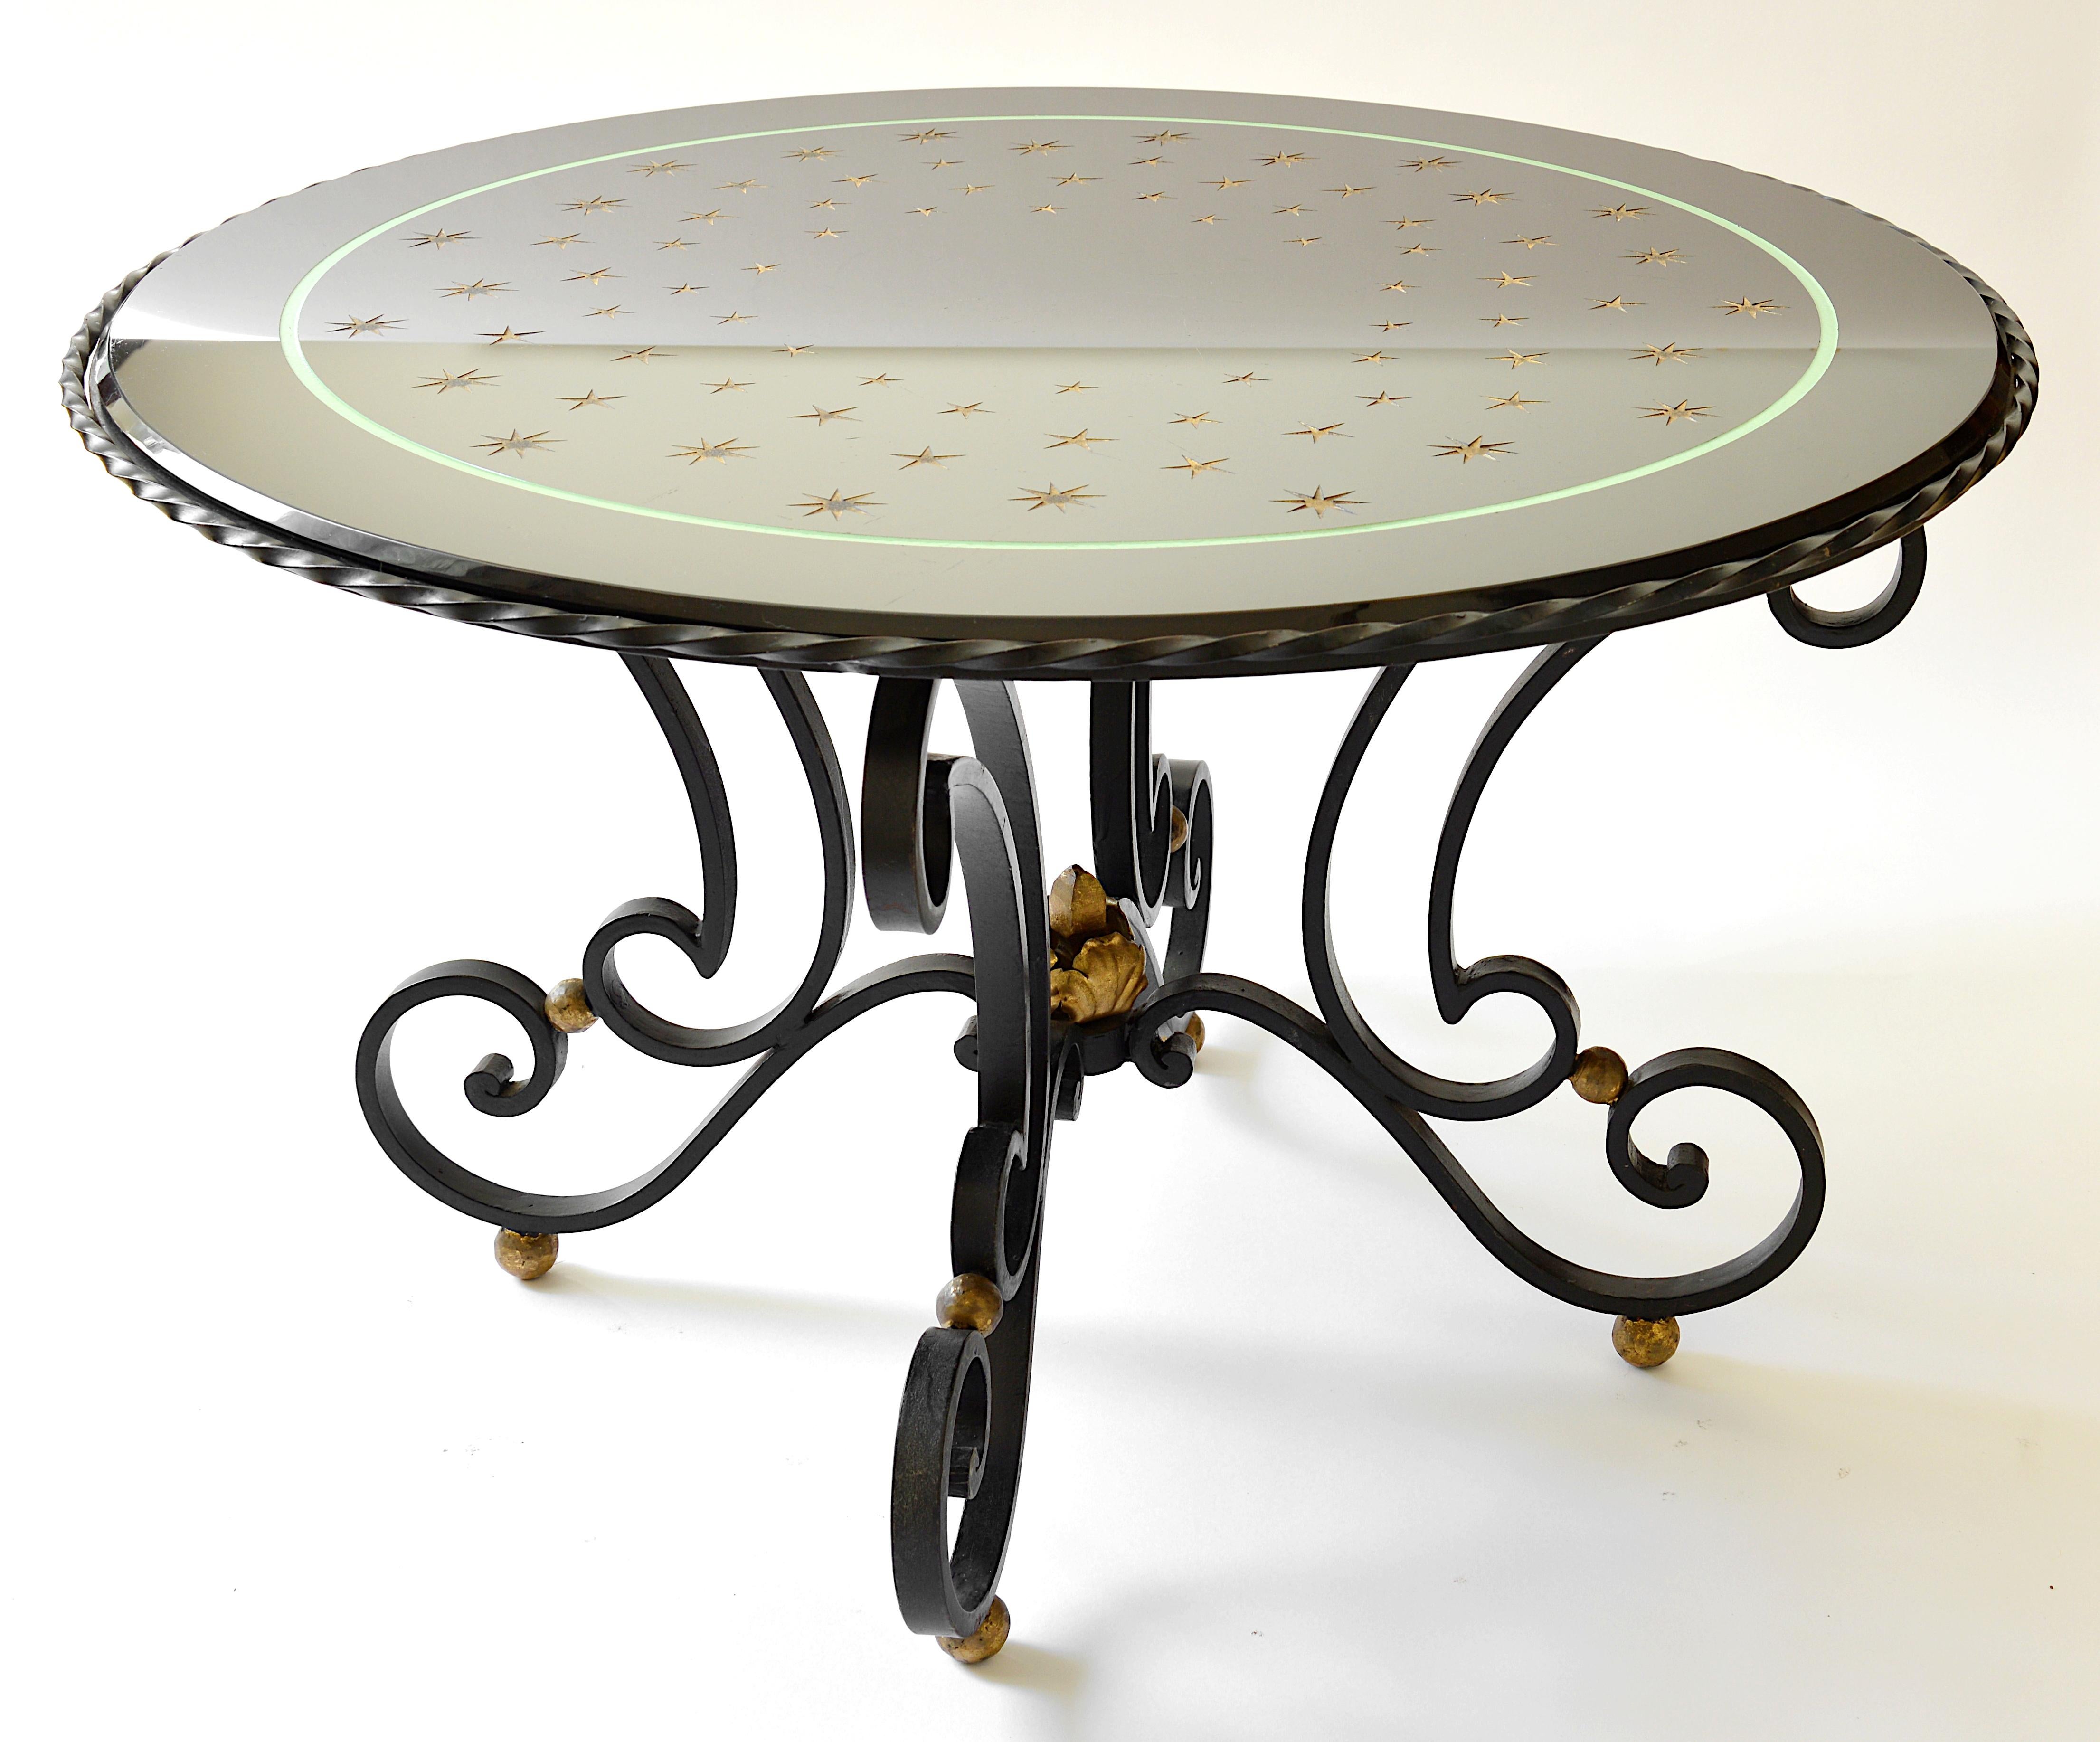 Mid-20th Century French Art Deco Wrought-Iron & Etched Glass Milky Way Coffee Table, Late 1930s For Sale